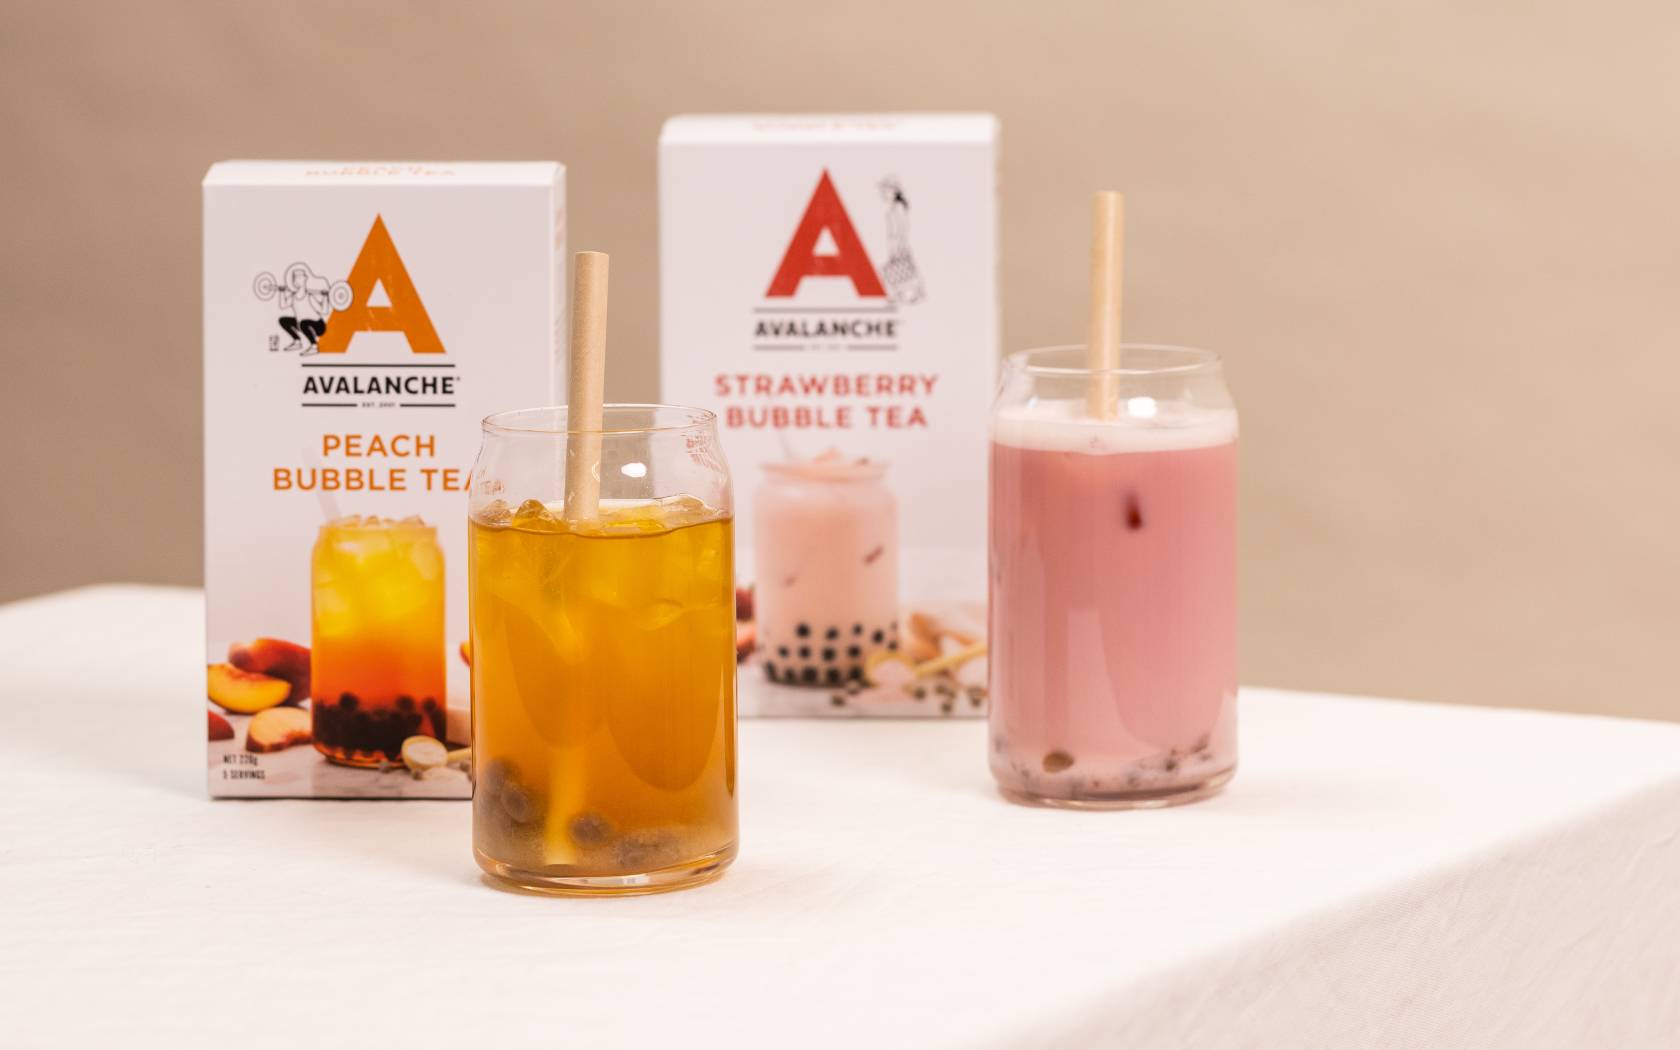 We Tried Those Woolworths Bubble Tea Kits To See If They're As Good